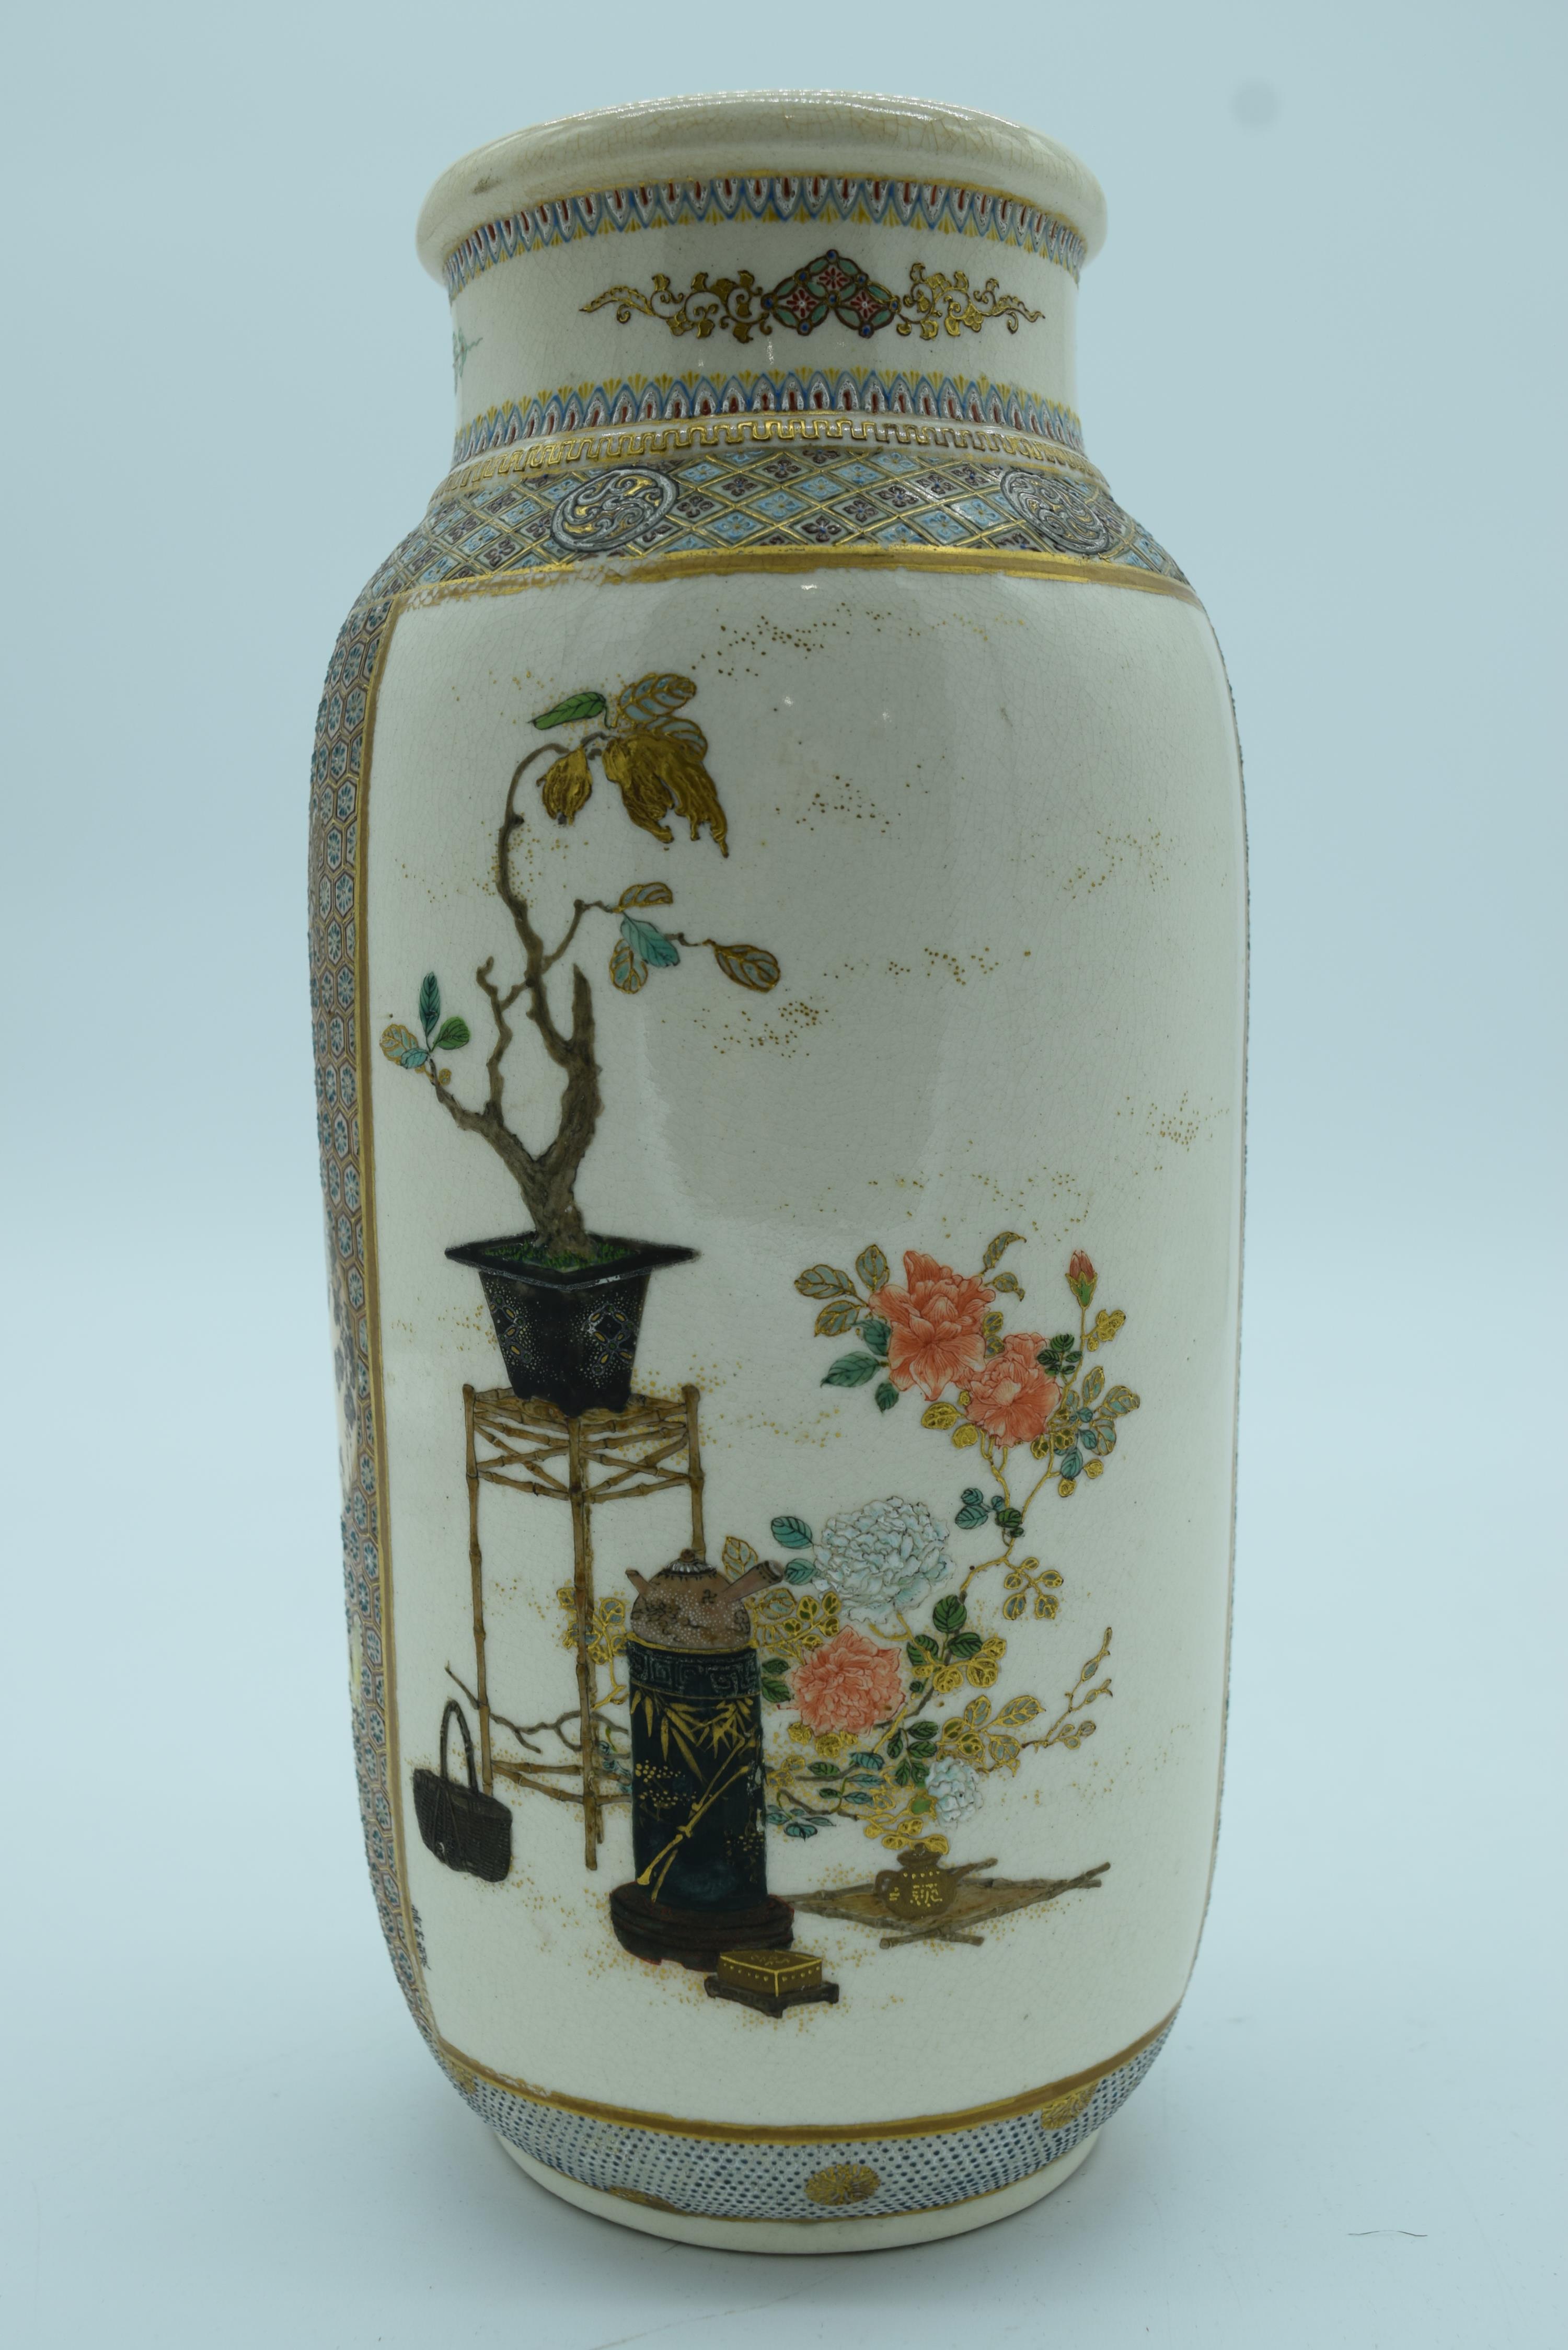 A PAIR OF 19TH CENTURY JAPANESE MEIJI PERIOD SATSUMA VASES painted with bonzai trees and high tables - Image 16 of 19